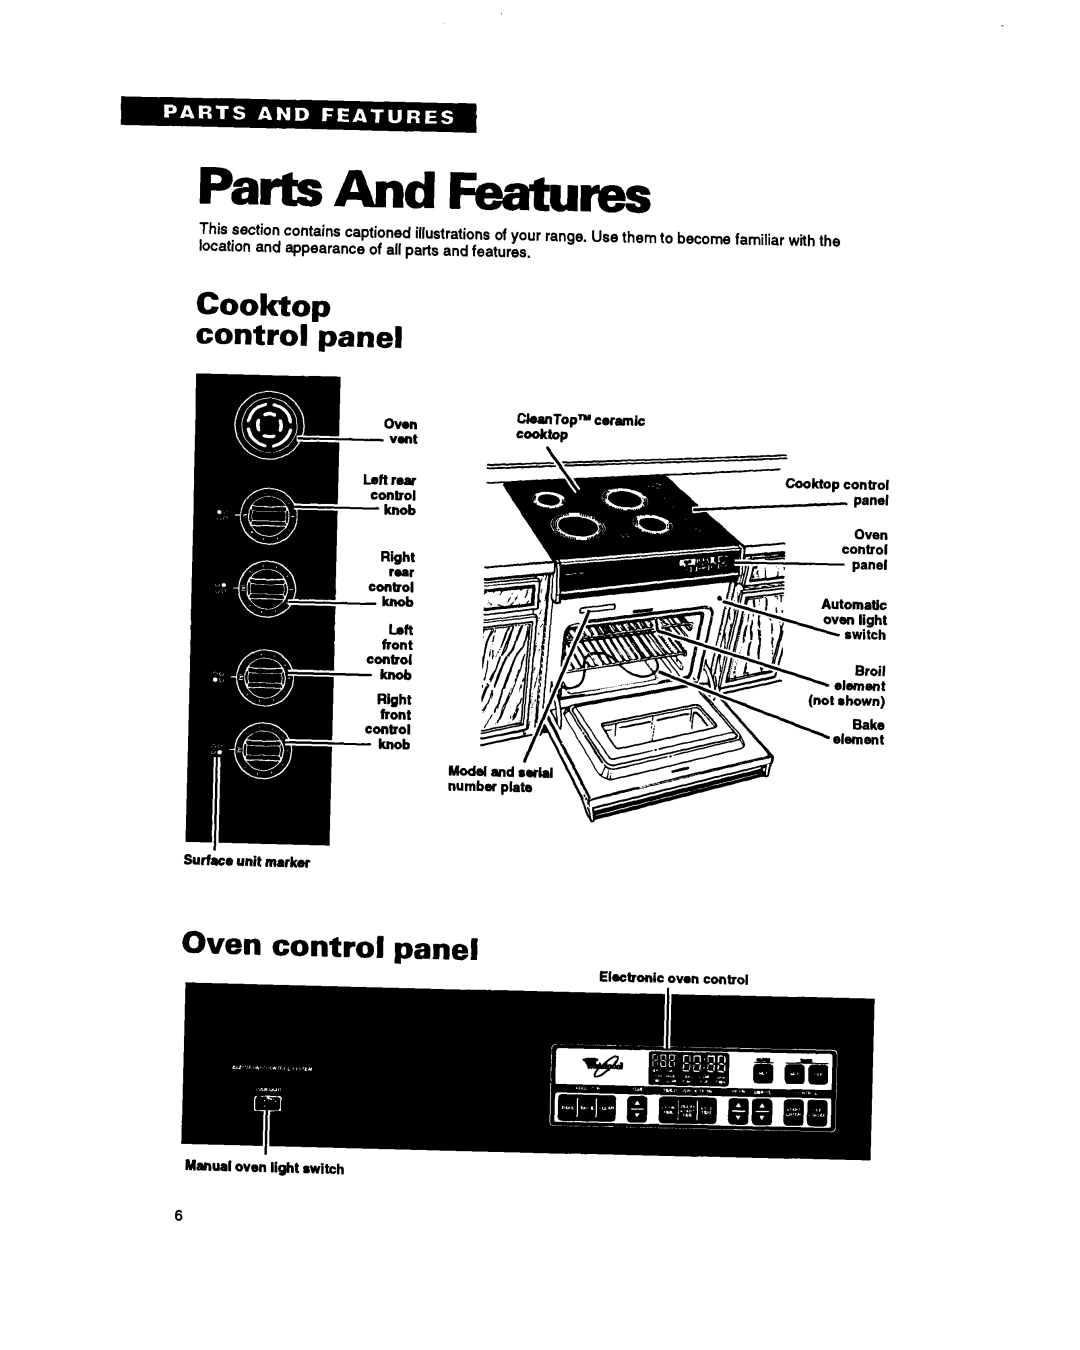 Whirlpool RS696PXB warranty Parts And Features, Cooktop control panel, Oven control panel 